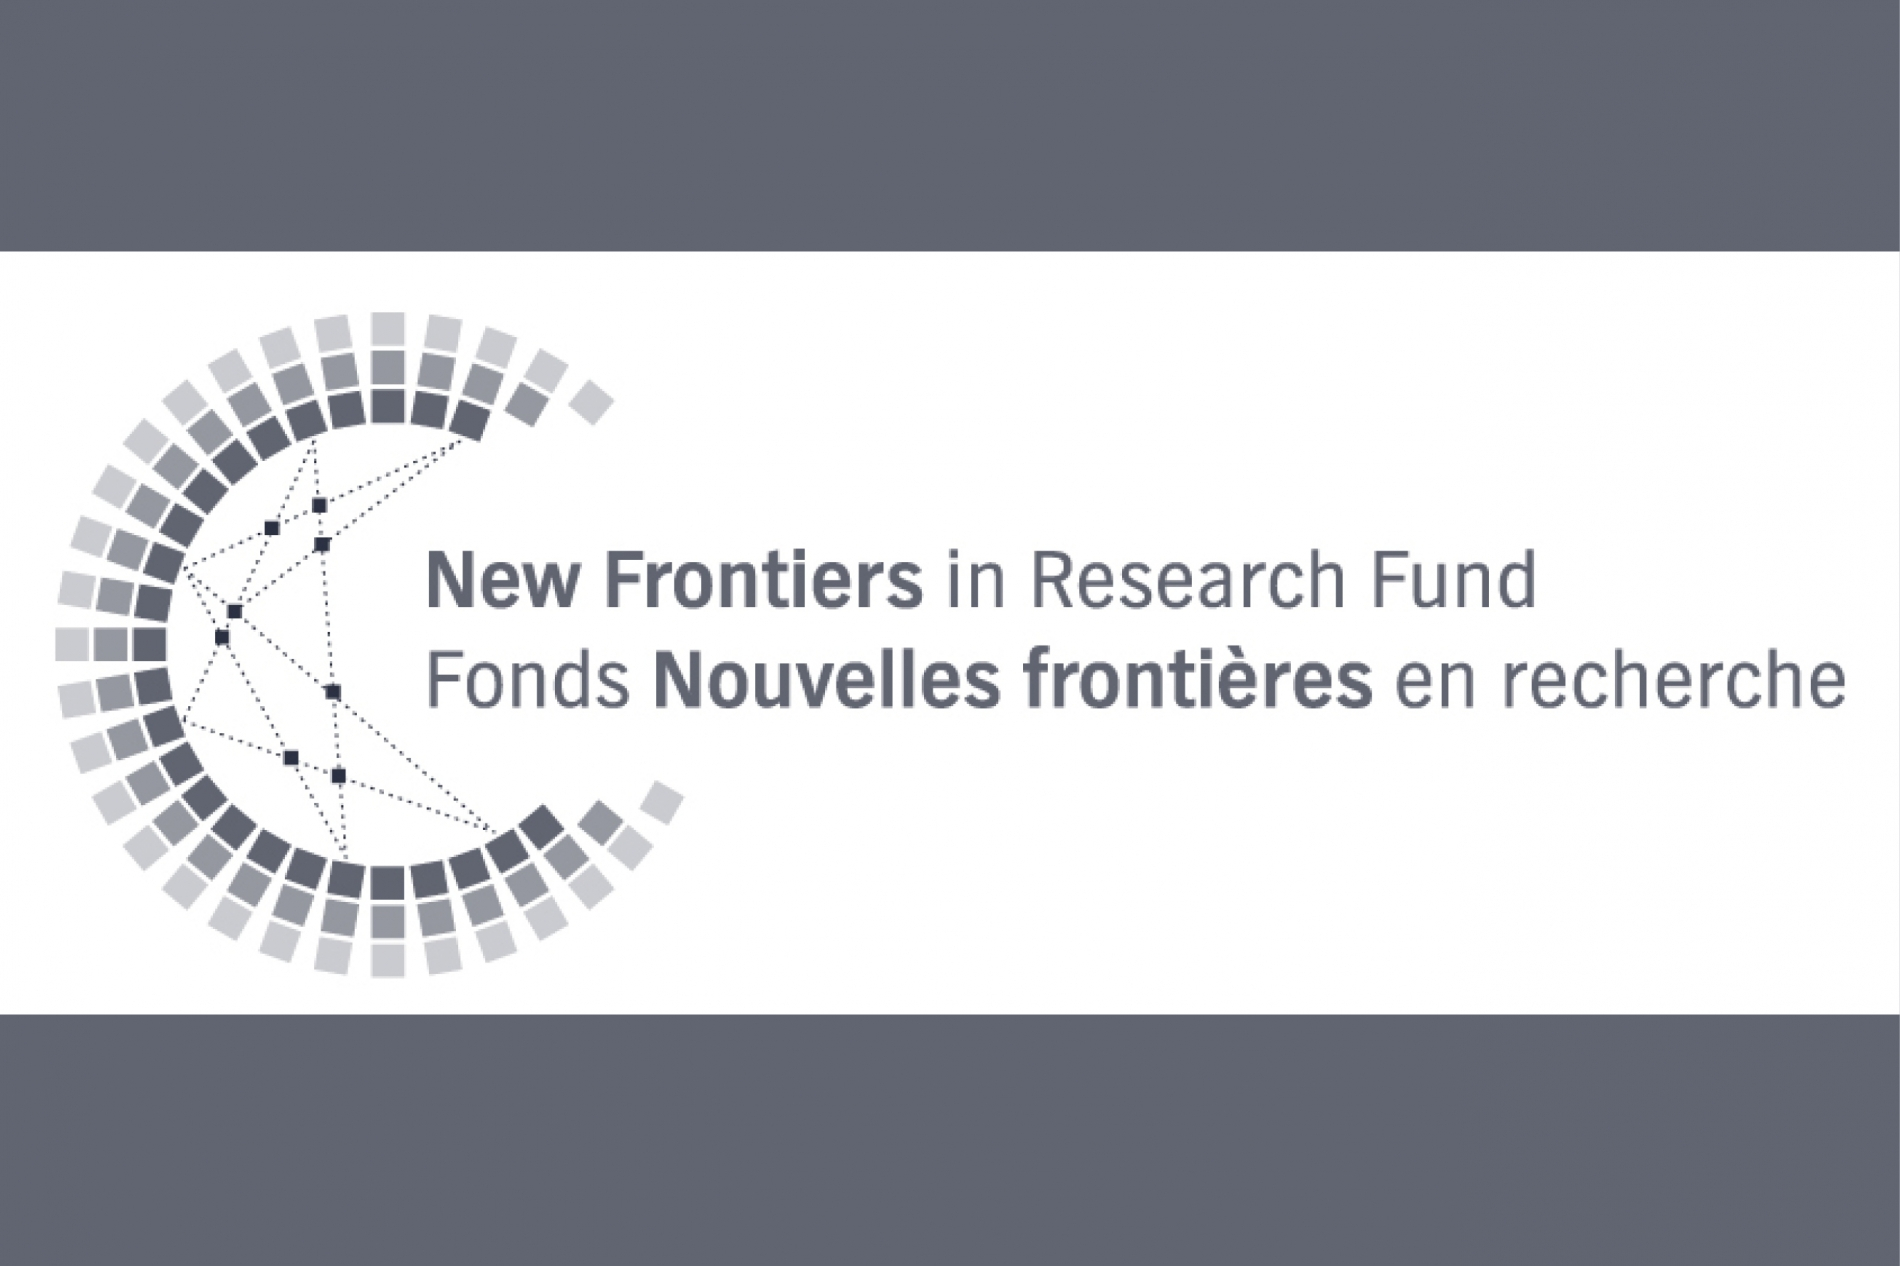 New Frontiers in Research Fund logo